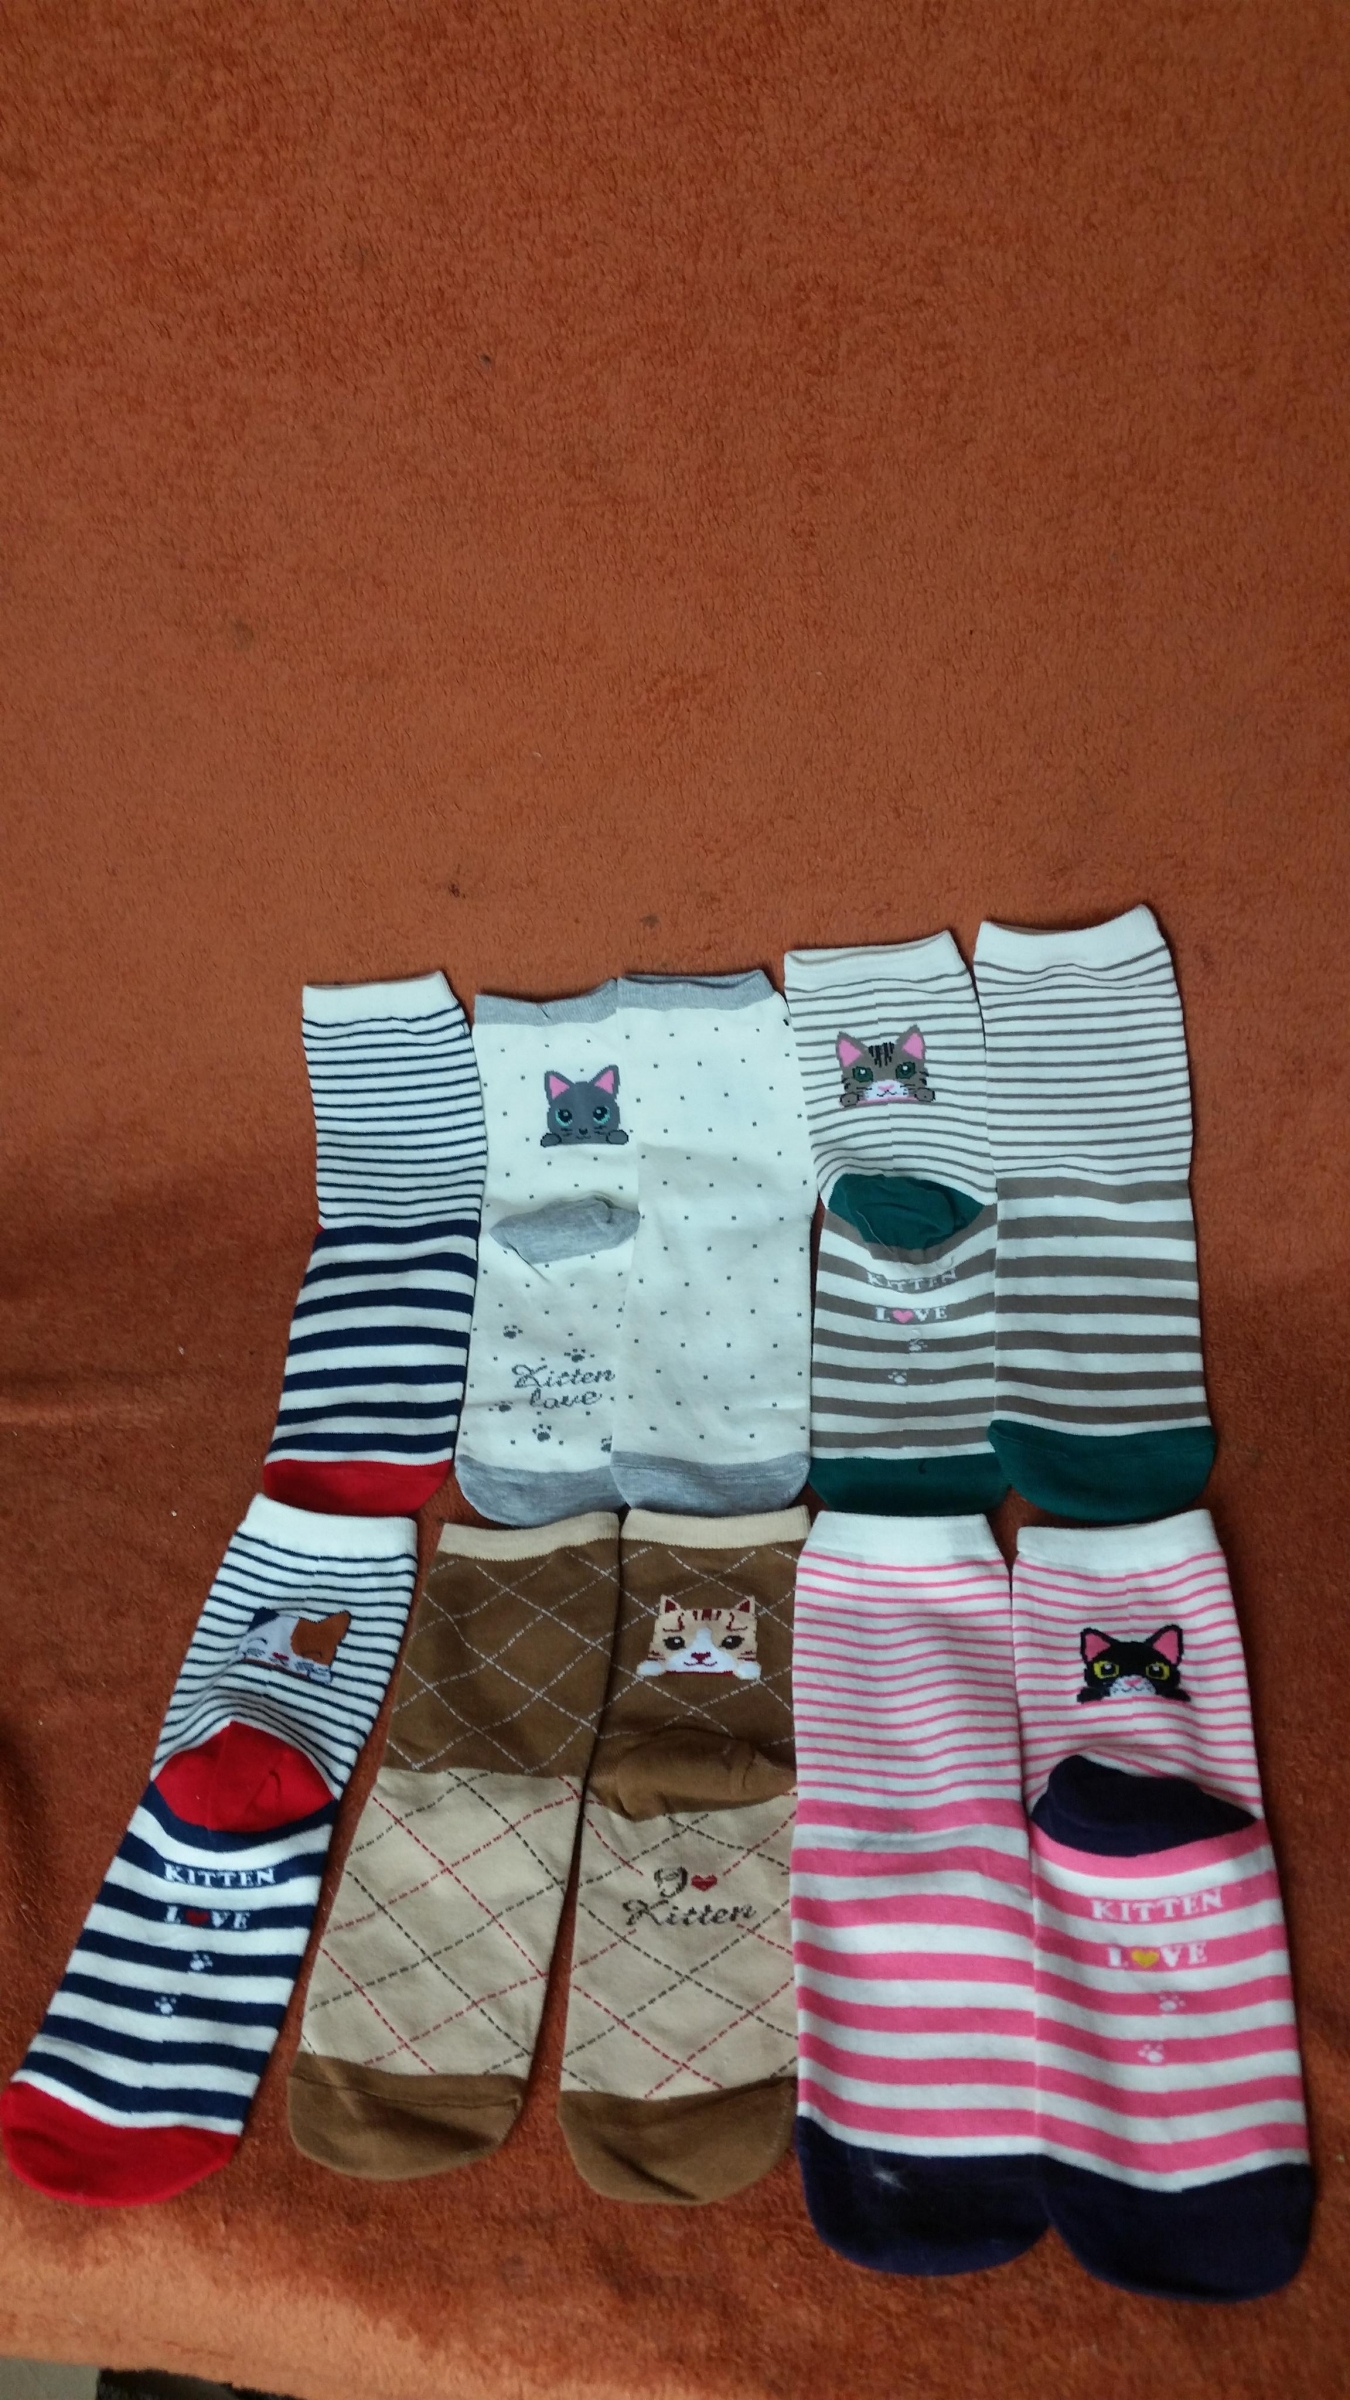 Add some cute fun to your sock wardrobe, 5 pack has 5 different cats on each sock, high quality, fits very well, comfy to wear & breathable.